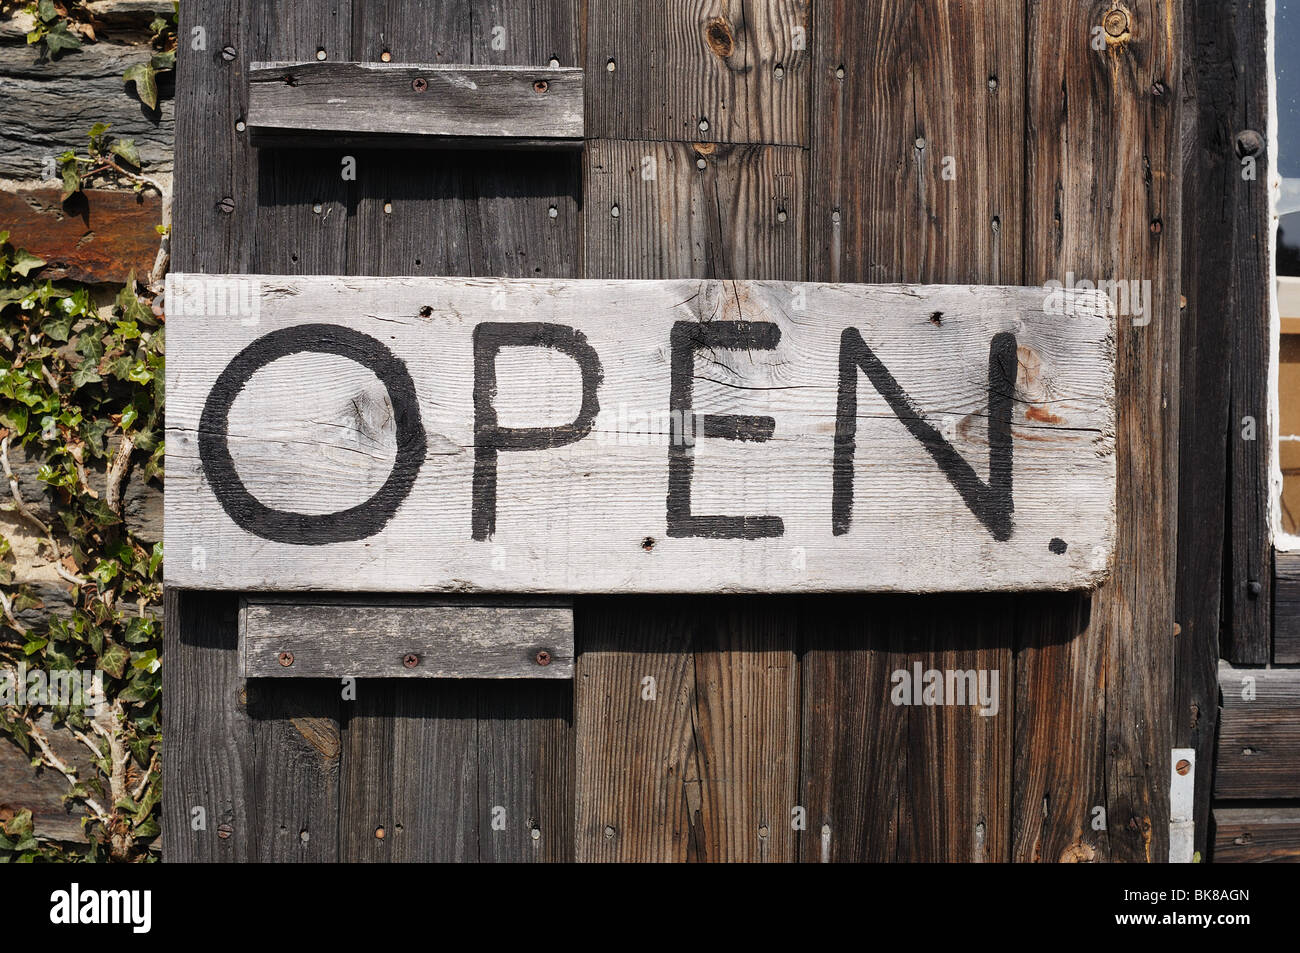 Open for Business - John Gollop Stock Photo